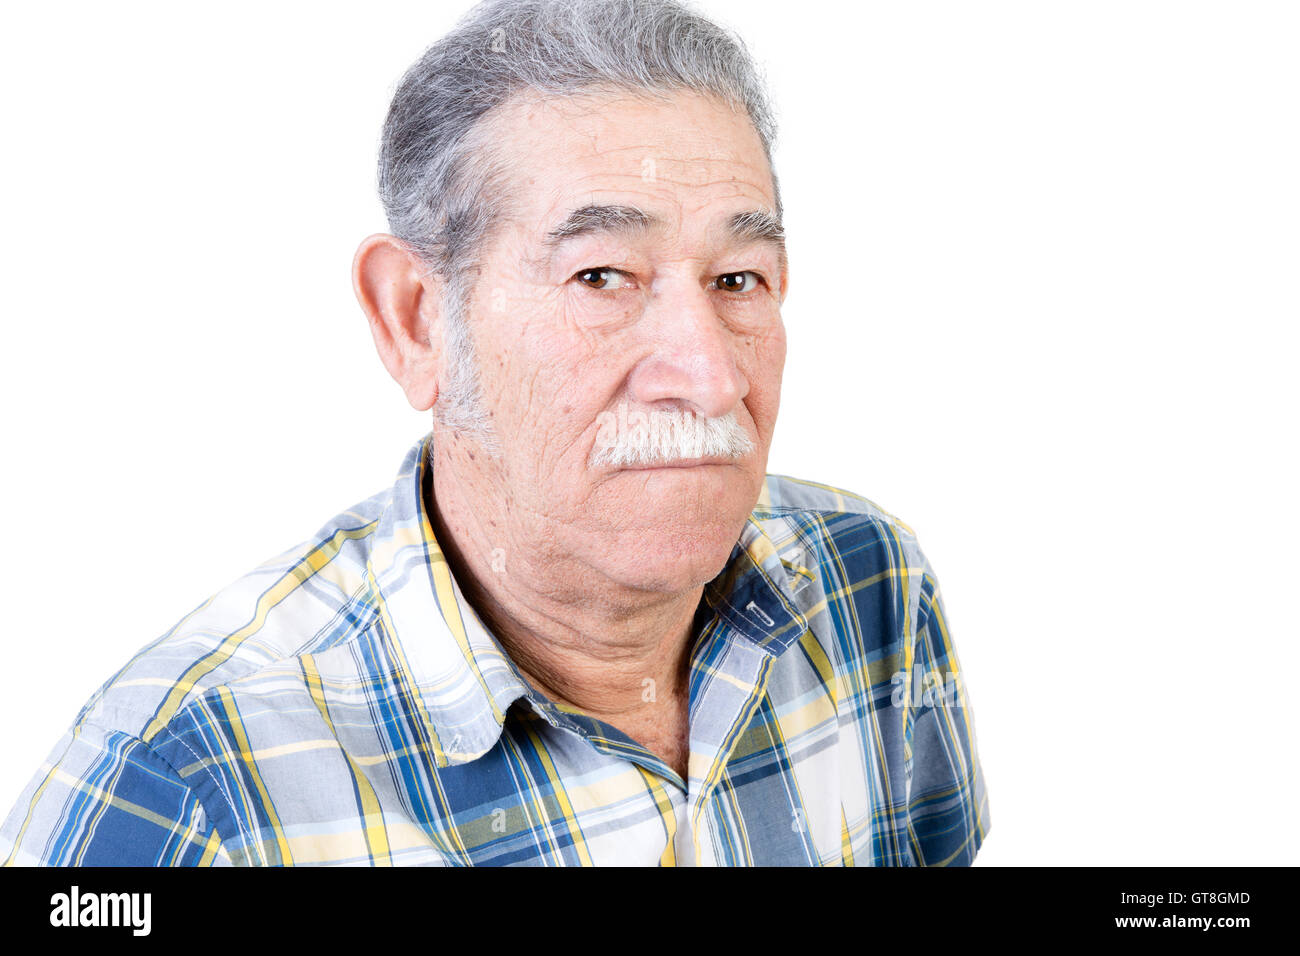 One serious mature male with mustache wearing blue and yellow striped flannel shirt over white background Stock Photo